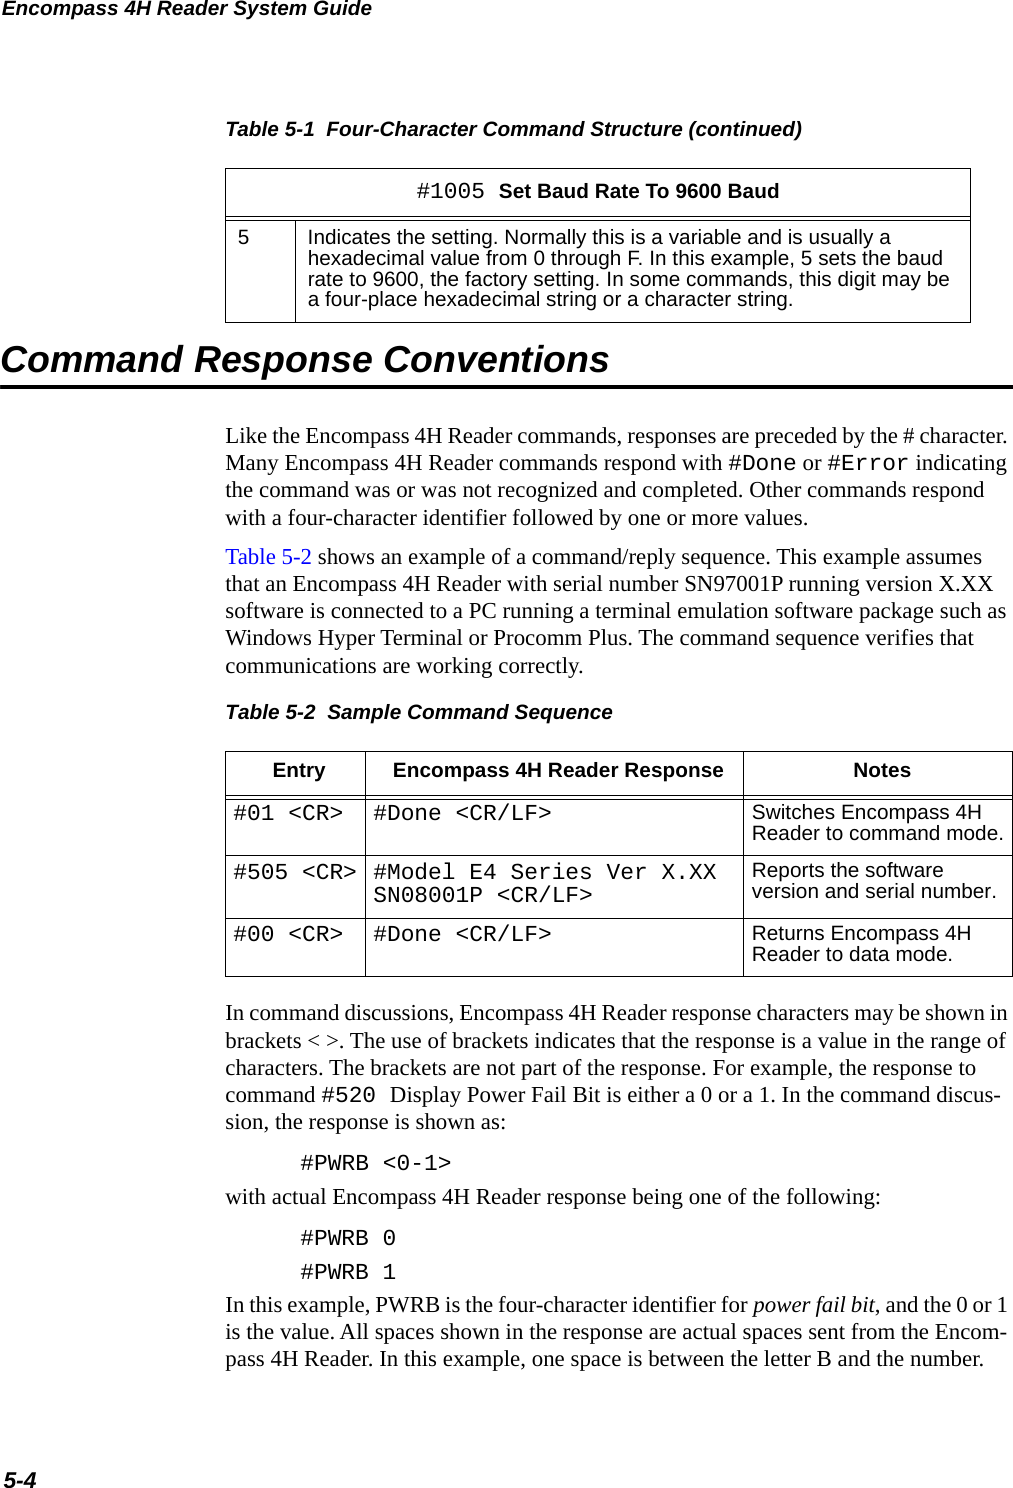 Encompass 4H Reader System Guide5-4Command Response ConventionsLike the Encompass 4H Reader commands, responses are preceded by the # character. Many Encompass 4H Reader commands respond with #Done or #Error indicating the command was or was not recognized and completed. Other commands respond with a four-character identifier followed by one or more values.Table 5-2 shows an example of a command/reply sequence. This example assumes that an Encompass 4H Reader with serial number SN97001P running version X.XX software is connected to a PC running a terminal emulation software package such as Windows Hyper Terminal or Procomm Plus. The command sequence verifies that communications are working correctly.Table 5-2  Sample Command SequenceEntry Encompass 4H Reader Response Notes#01 &lt;CR&gt; #Done &lt;CR/LF&gt; Switches Encompass 4H Reader to command mode.#505 &lt;CR&gt; #Model E4 Series Ver X.XX SN08001P &lt;CR/LF&gt; Reports the software version and serial number.#00 &lt;CR&gt; #Done &lt;CR/LF&gt; Returns Encompass 4H Reader to data mode.In command discussions, Encompass 4H Reader response characters may be shown in brackets &lt; &gt;. The use of brackets indicates that the response is a value in the range of characters. The brackets are not part of the response. For example, the response to command #520 Display Power Fail Bit is either a 0 or a 1. In the command discus-sion, the response is shown as:#PWRB &lt;0-1&gt;with actual Encompass 4H Reader response being one of the following:#PWRB 0#PWRB 1In this example, PWRB is the four-character identifier for power fail bit, and the 0 or 1 is the value. All spaces shown in the response are actual spaces sent from the Encom-pass 4H Reader. In this example, one space is between the letter B and the number. 5Indicates the setting. Normally this is a variable and is usually a hexadecimal value from 0 through F. In this example, 5 sets the baud rate to 9600, the factory setting. In some commands, this digit may be a four-place hexadecimal string or a character string.Table 5-1  Four-Character Command Structure (continued)#1005 Set Baud Rate To 9600 Baud